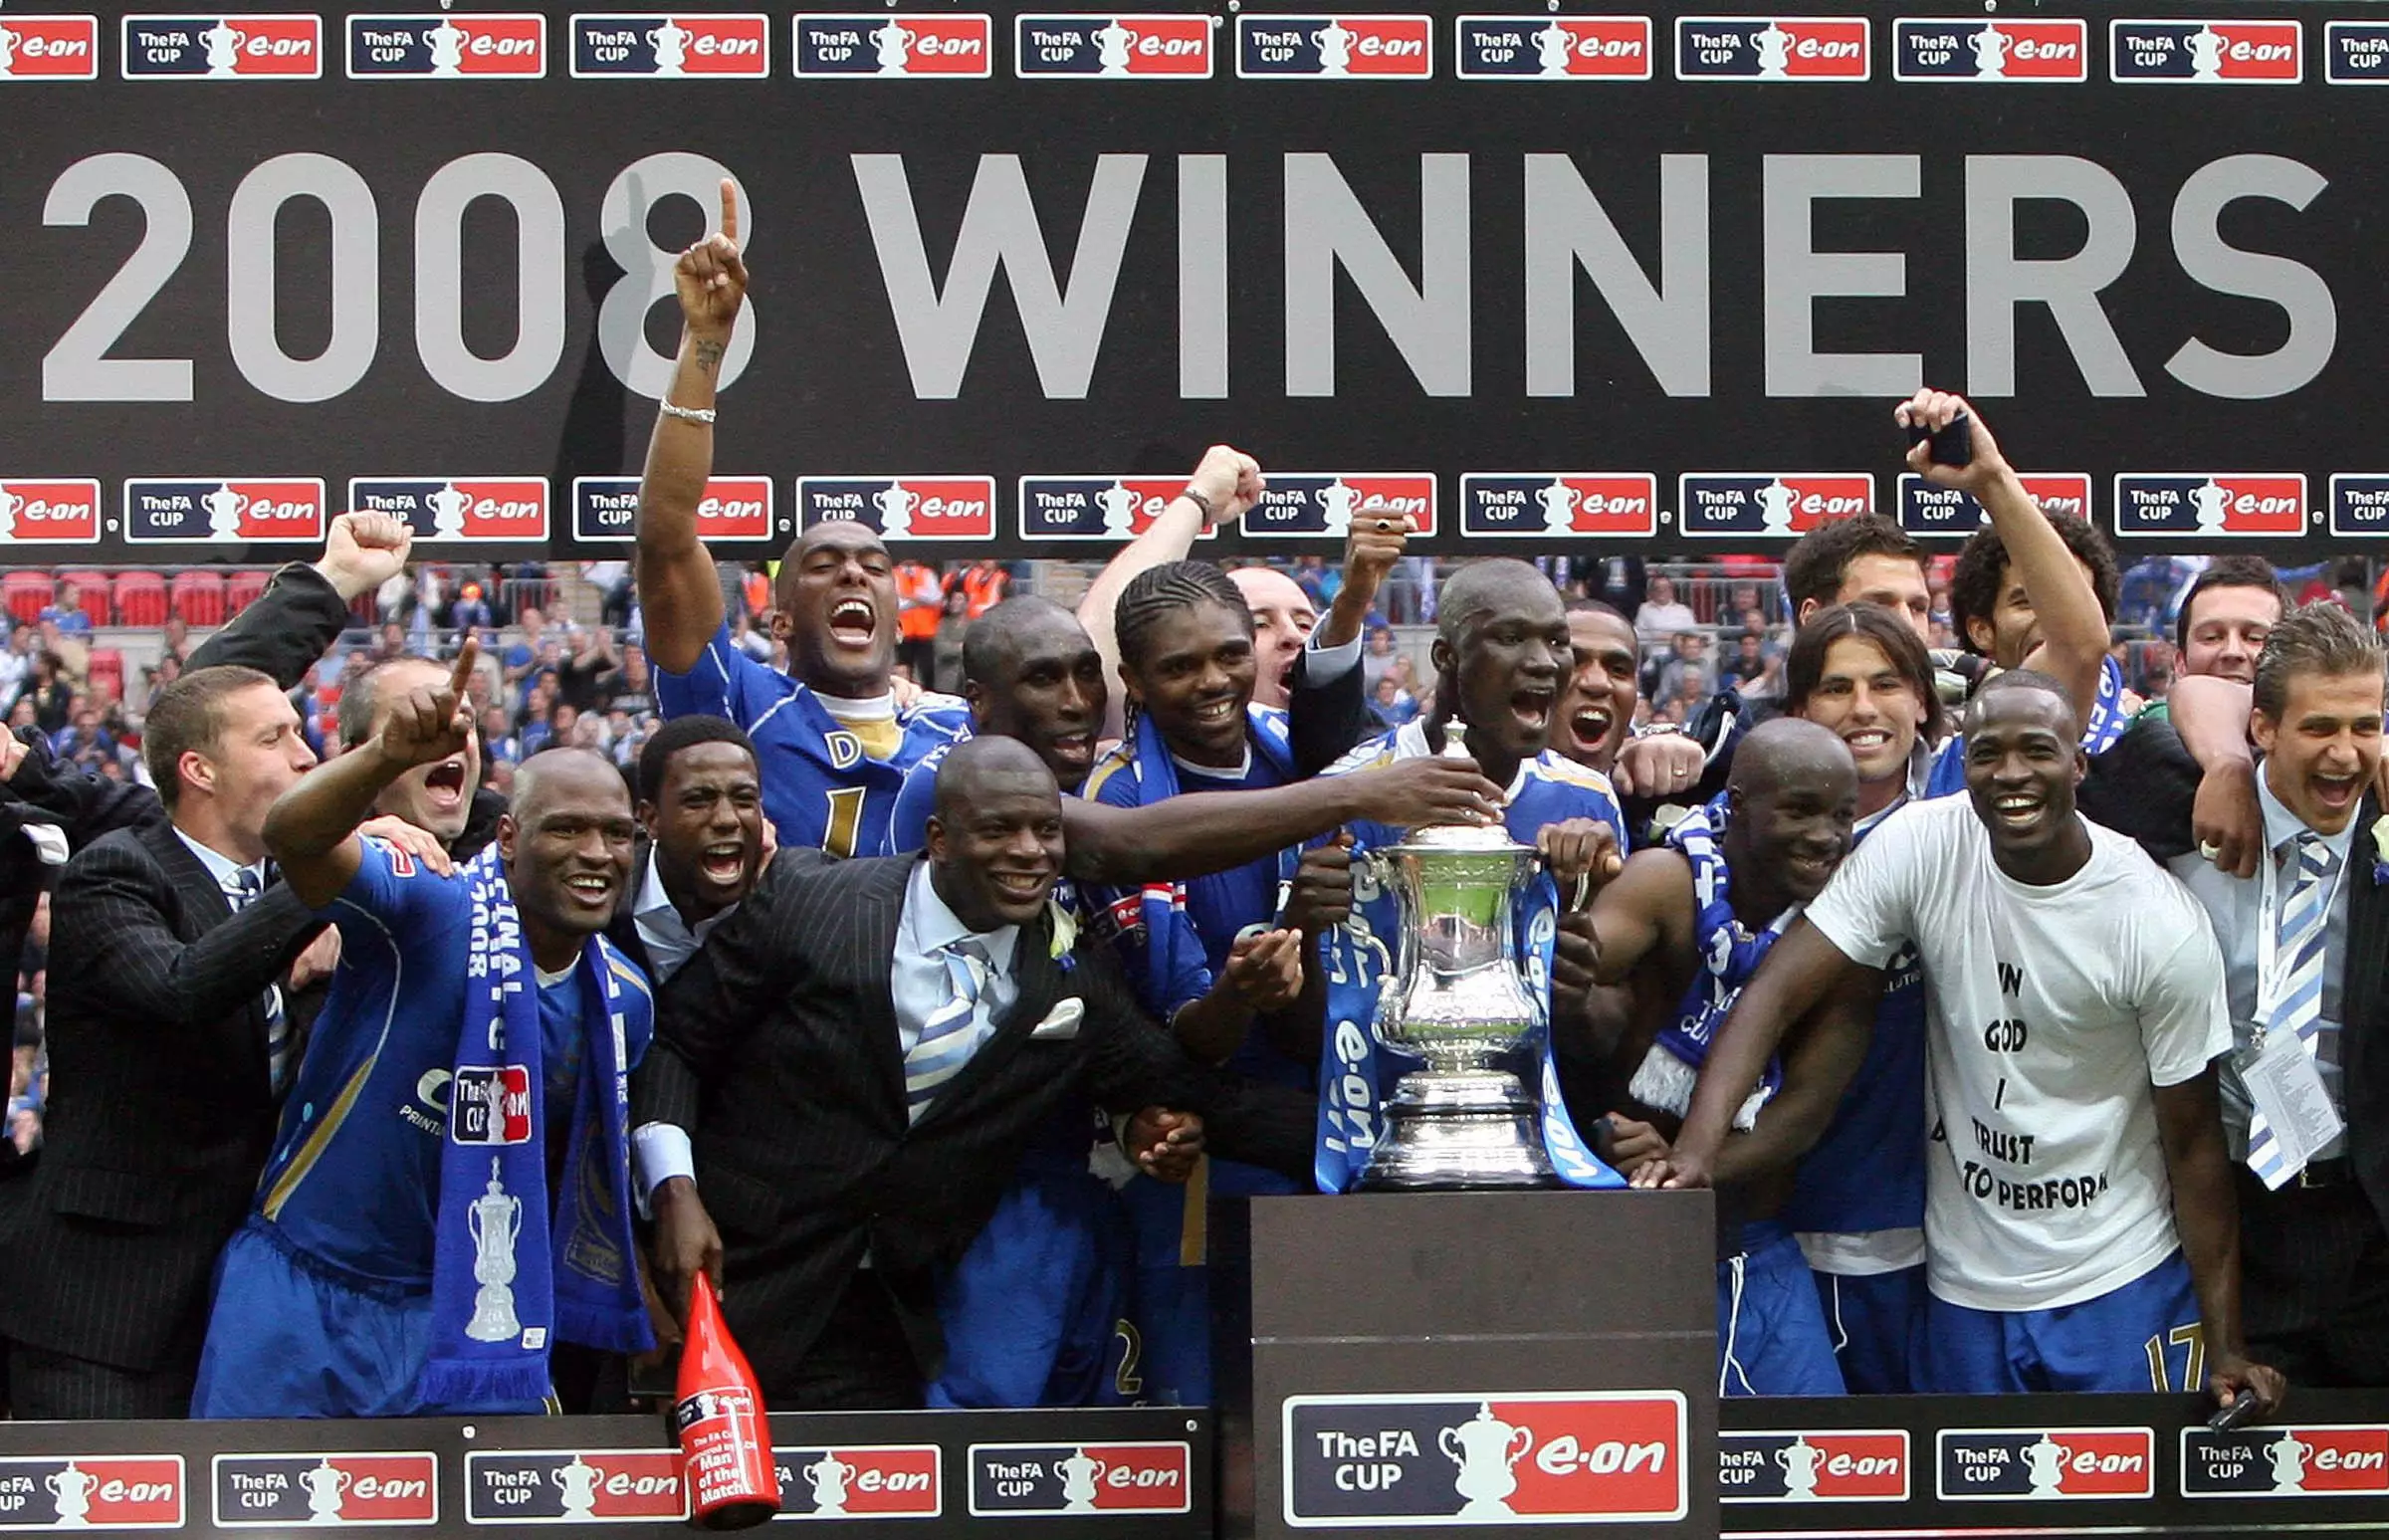 Portsmouth's semi-final victory over Manchester United in 2008 on the way to FA Cup glory is one of the games to be shown. (Image